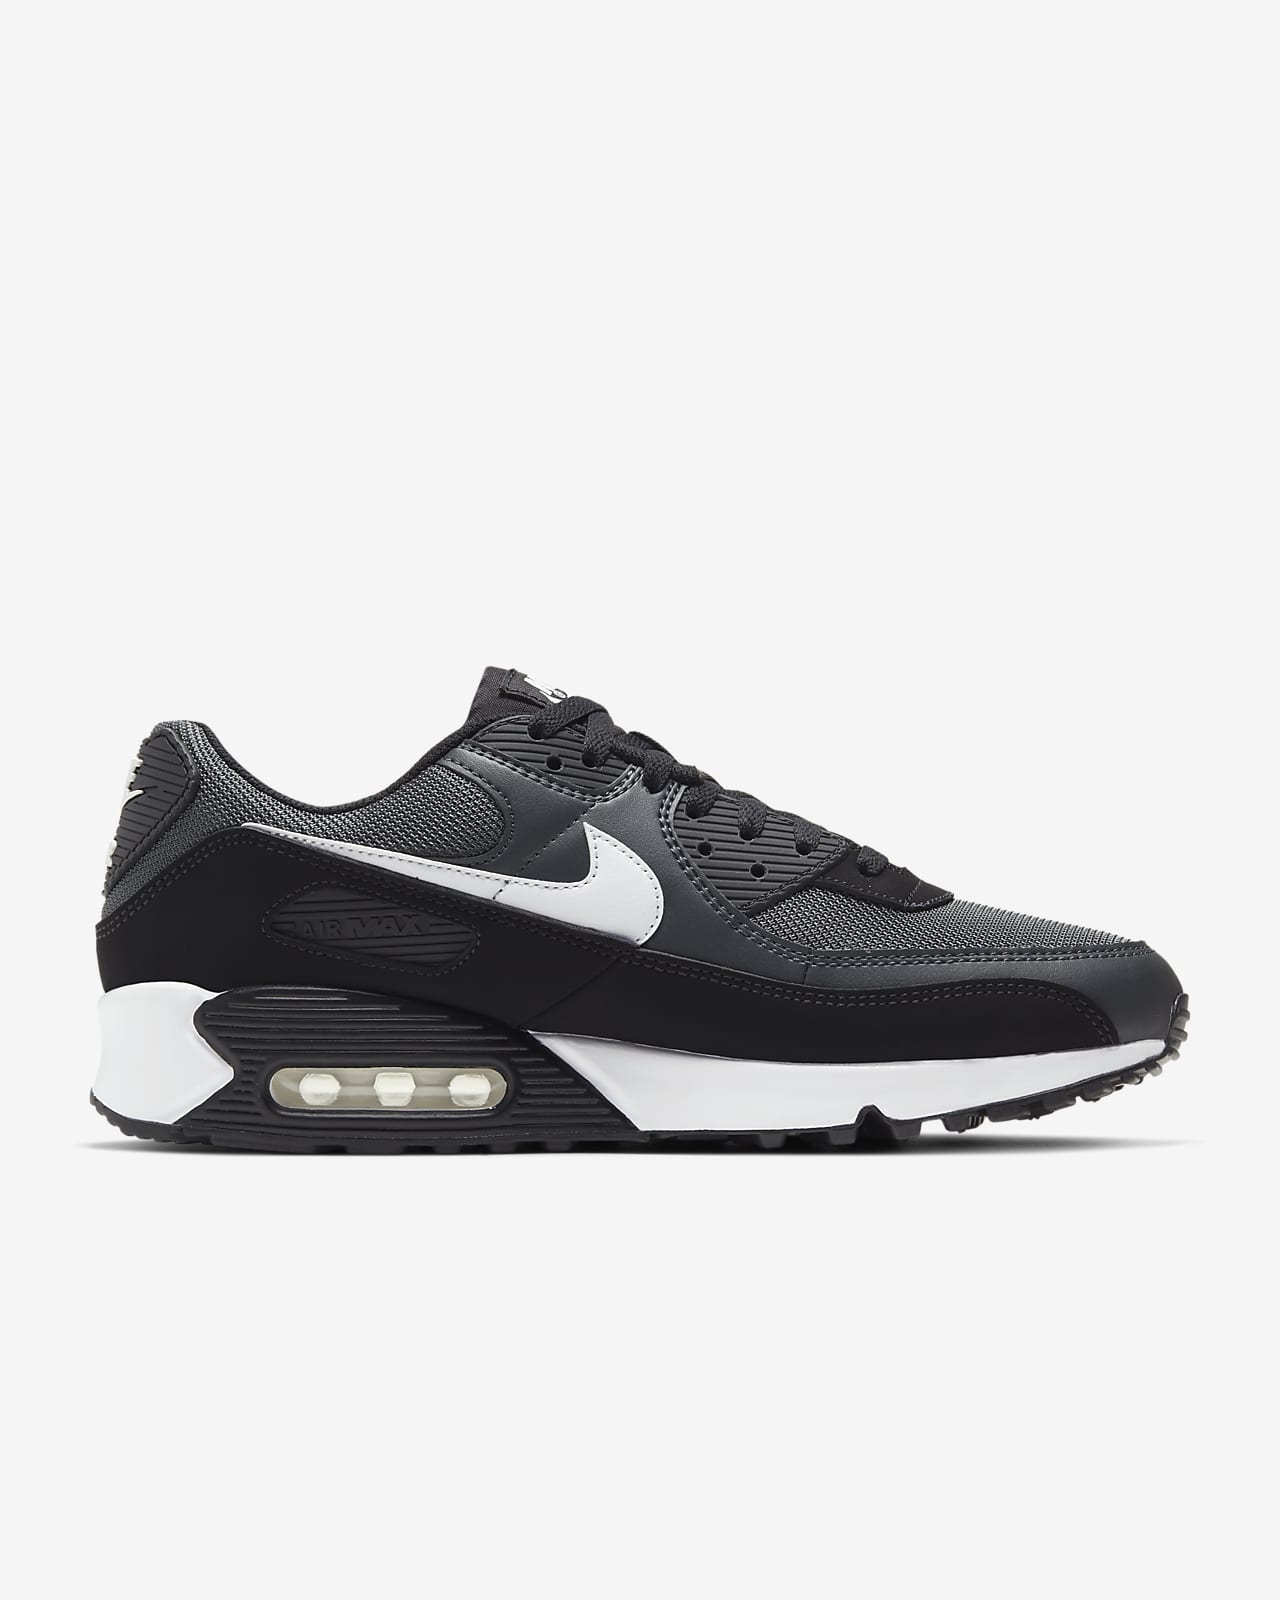 Ours Chaise longue game Nike Air Max 90 Men's Shoes. Nike.com